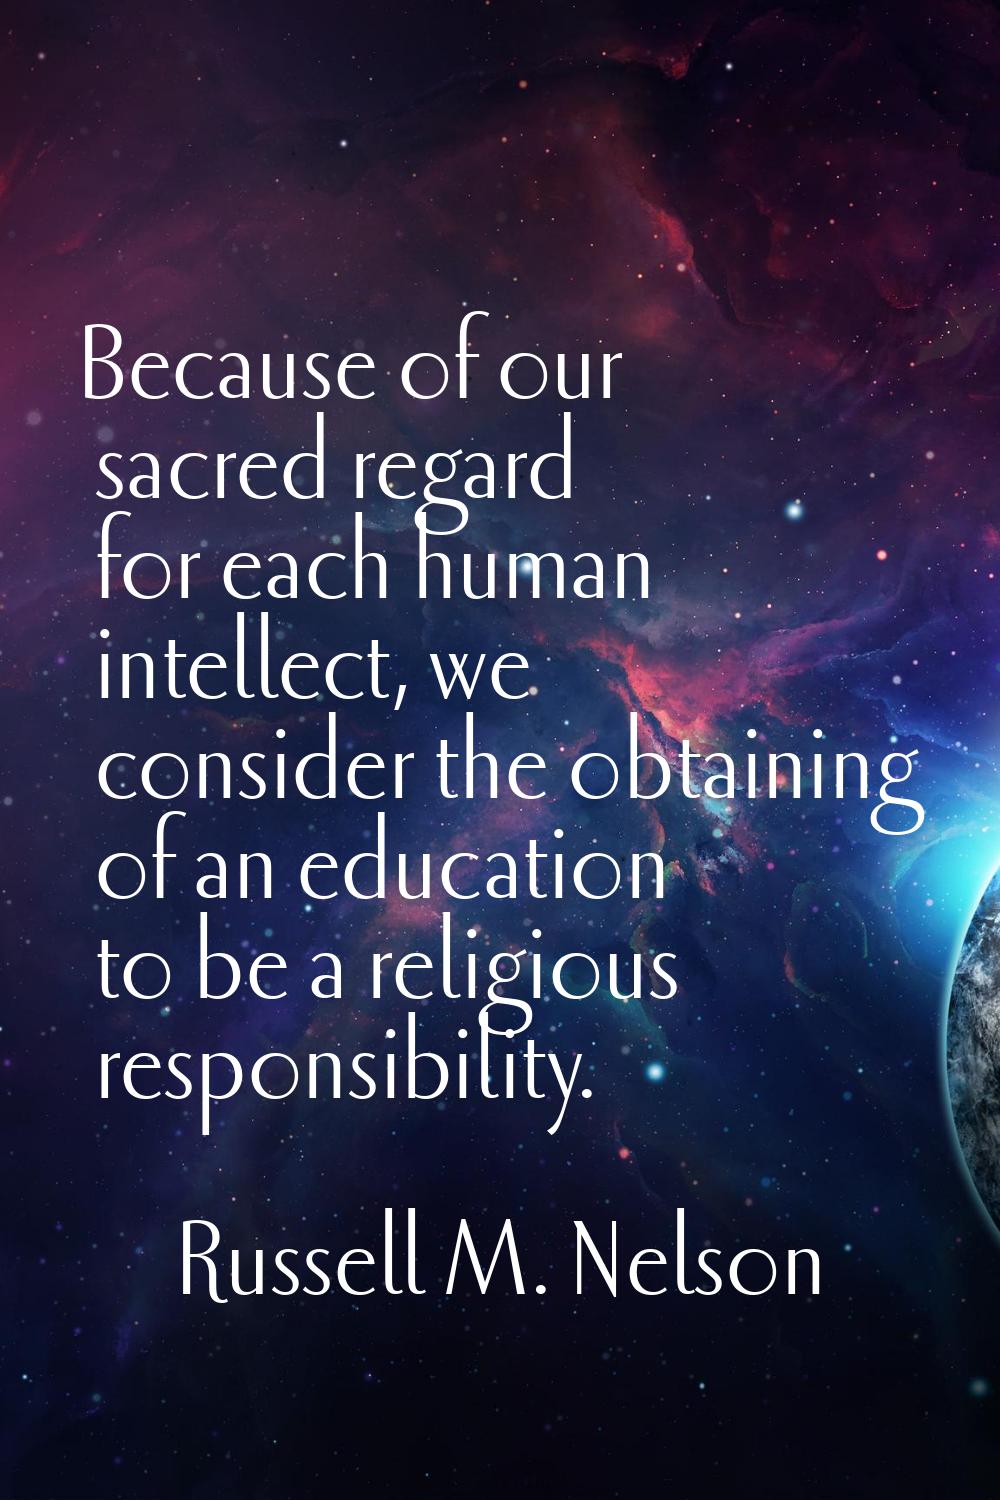 Because of our sacred regard for each human intellect, we consider the obtaining of an education to